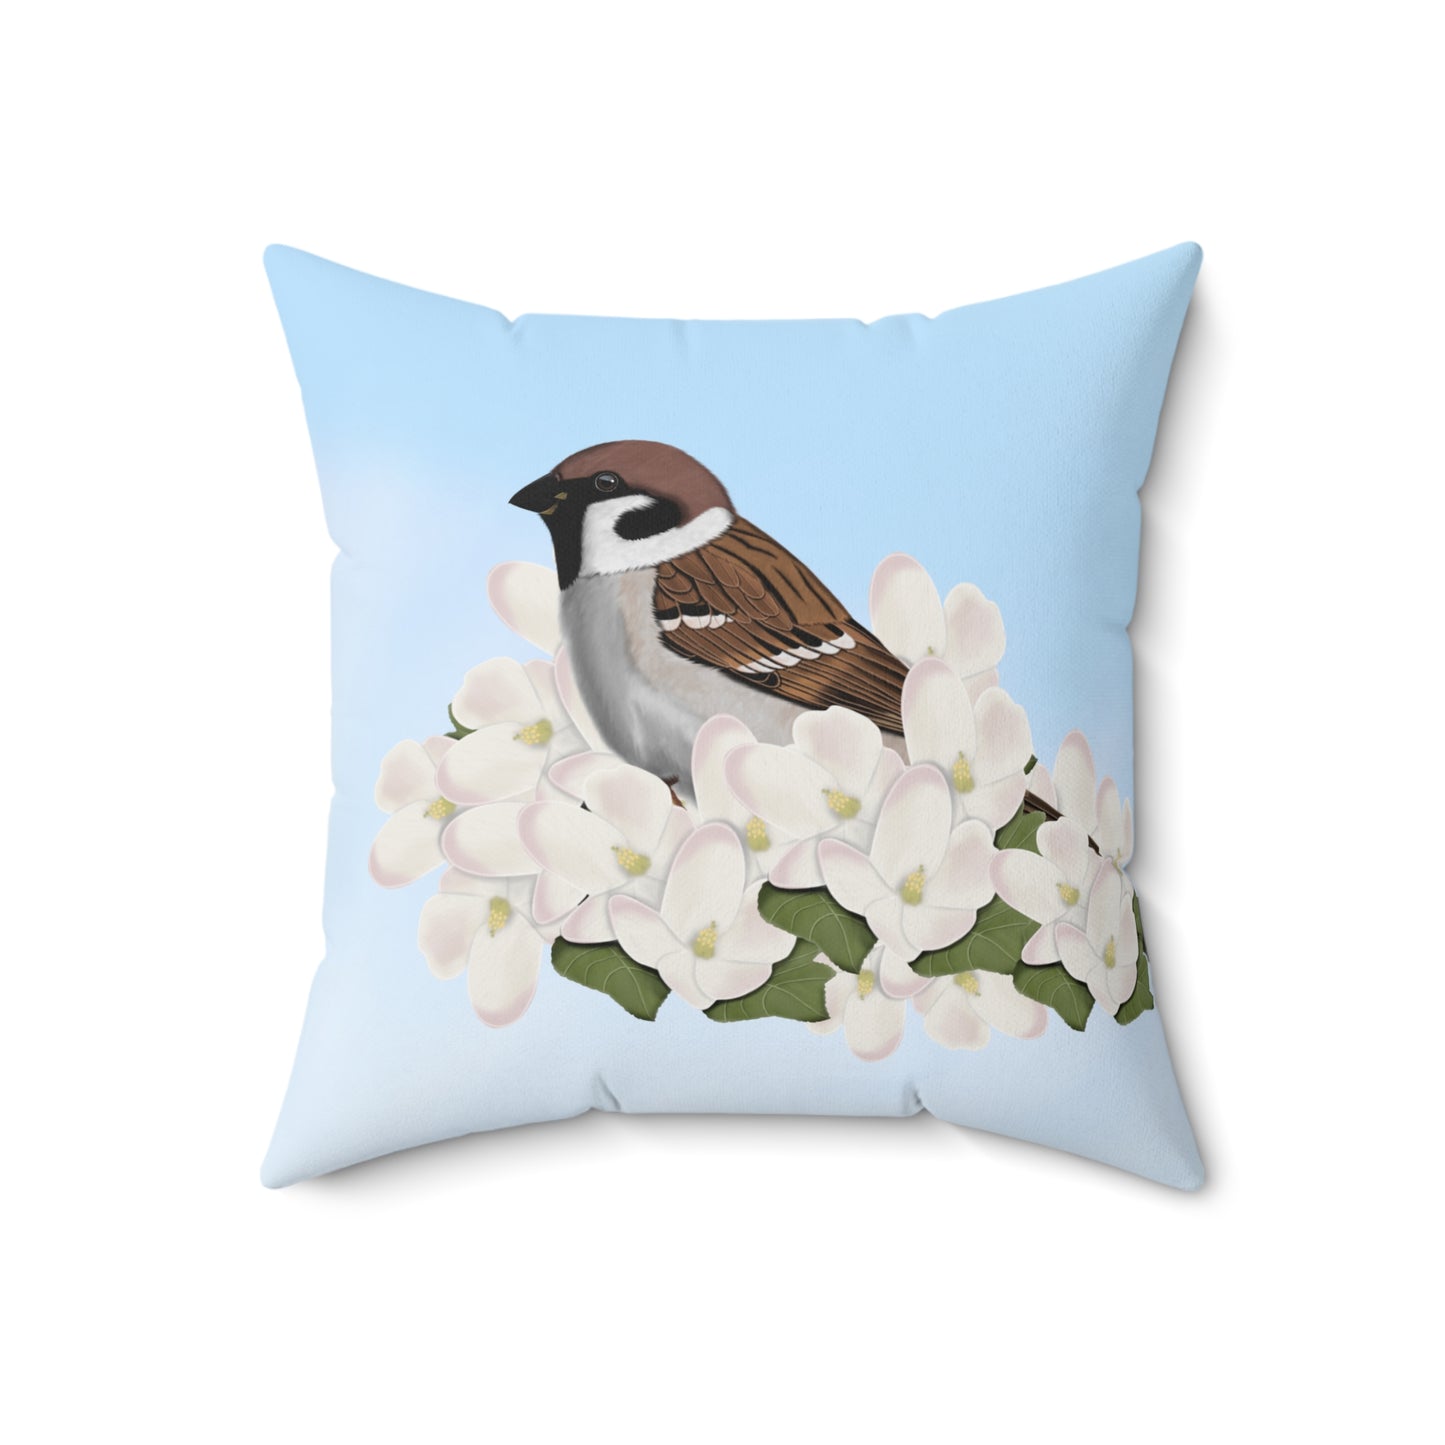 Sparrow and Apple Blossoms Bird Throw Pillow 16"x16"